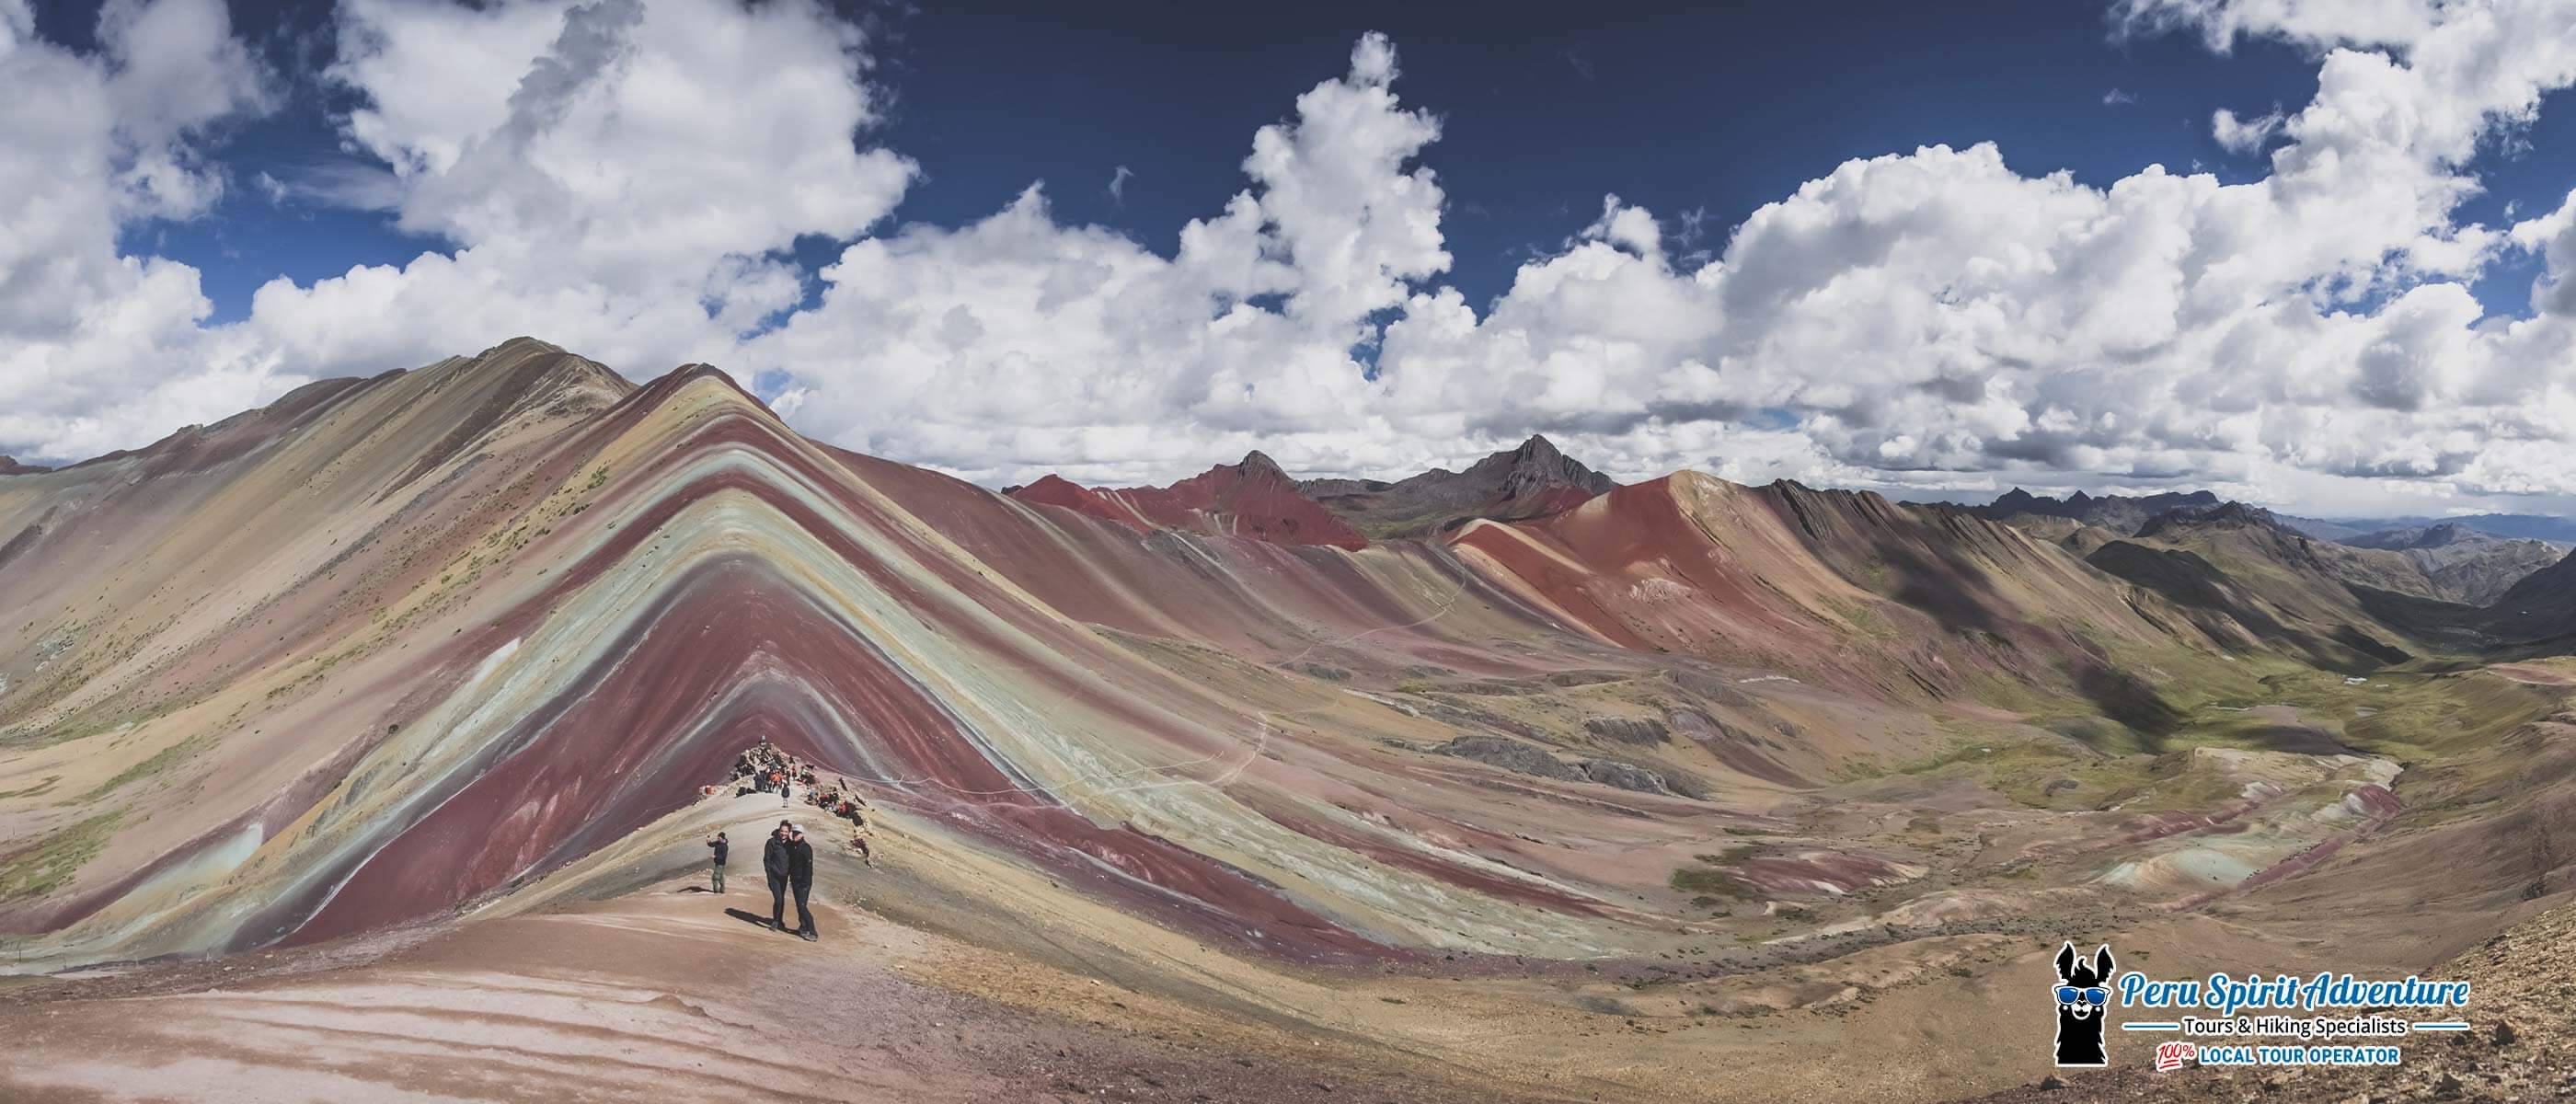 A Unique 1 Day Hike to Vinicunca